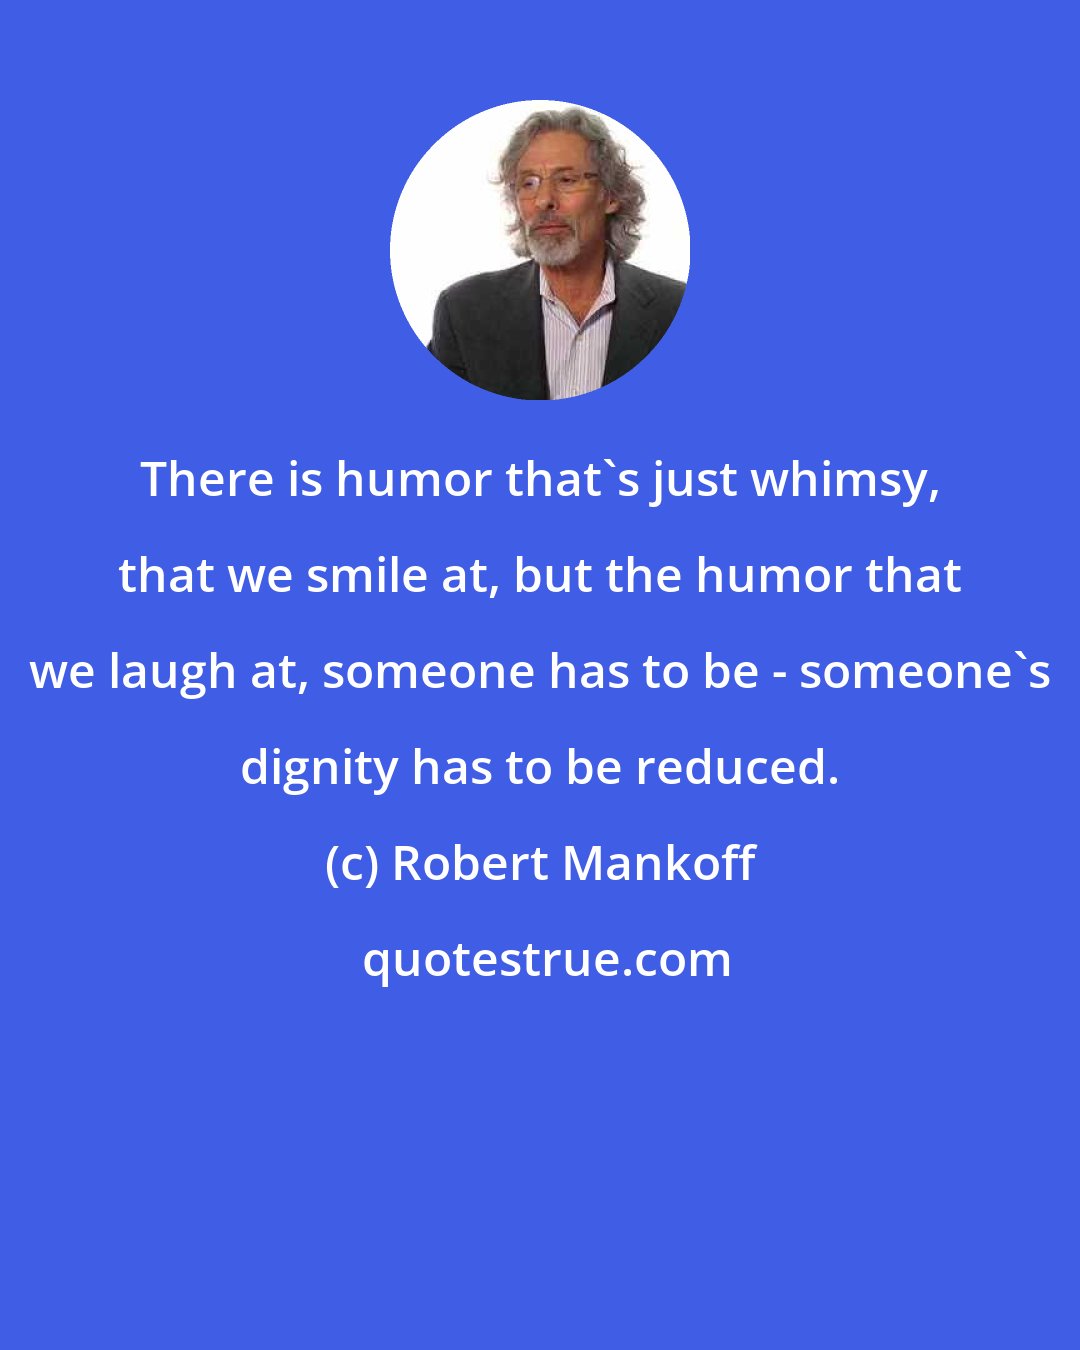 Robert Mankoff: There is humor that's just whimsy, that we smile at, but the humor that we laugh at, someone has to be - someone's dignity has to be reduced.